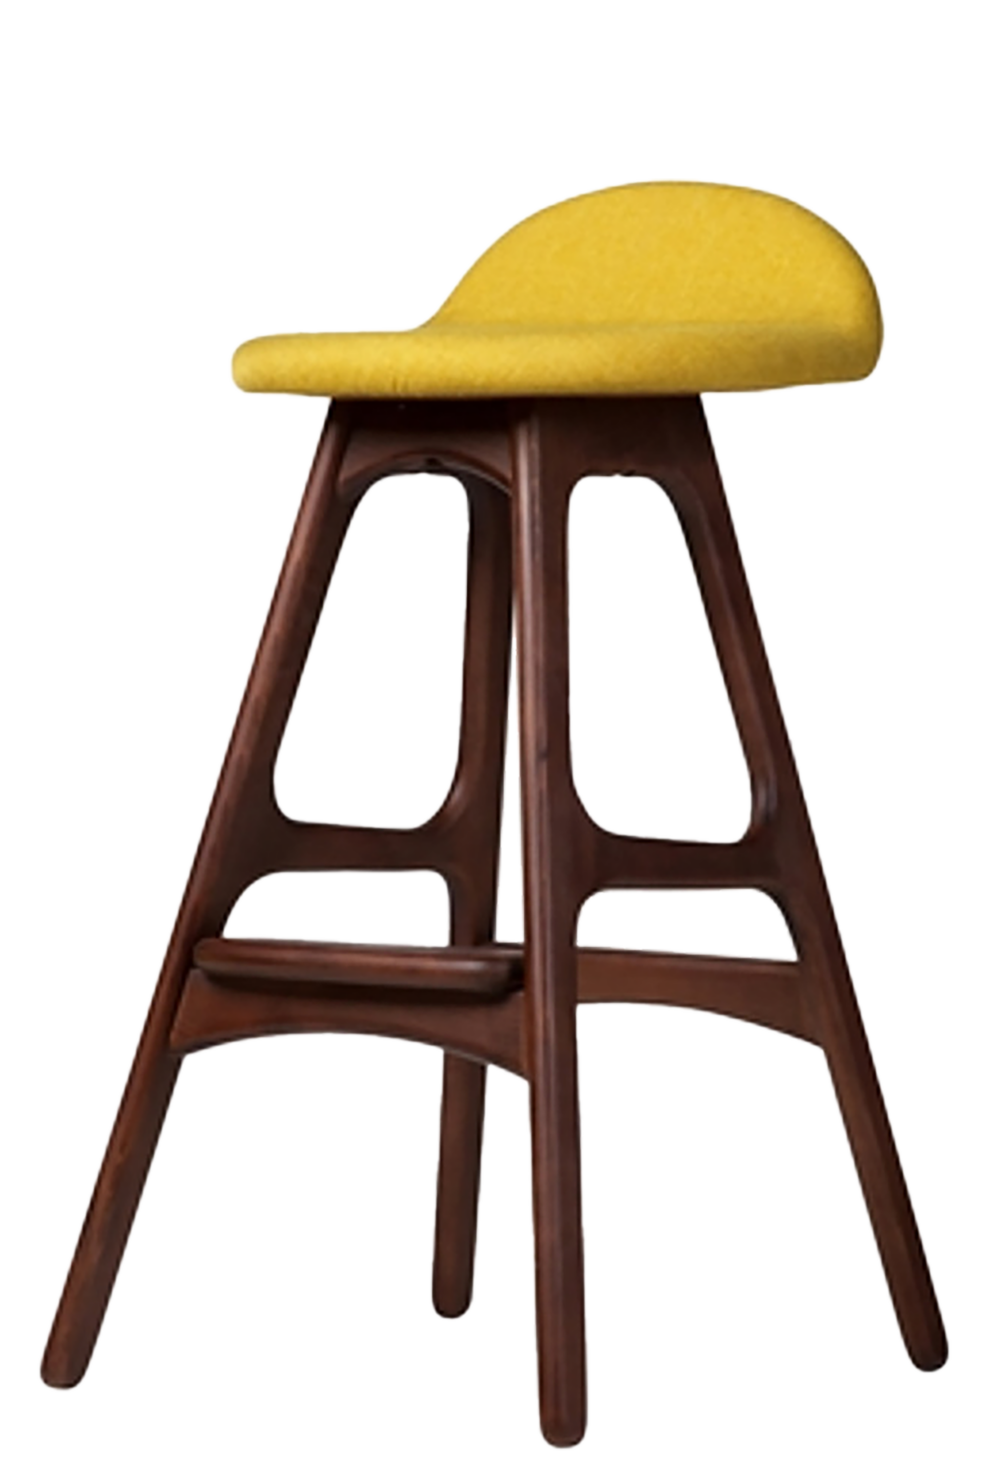 featured in the Russell nashville: a wooden stool with a backless, mustard yellow seat 